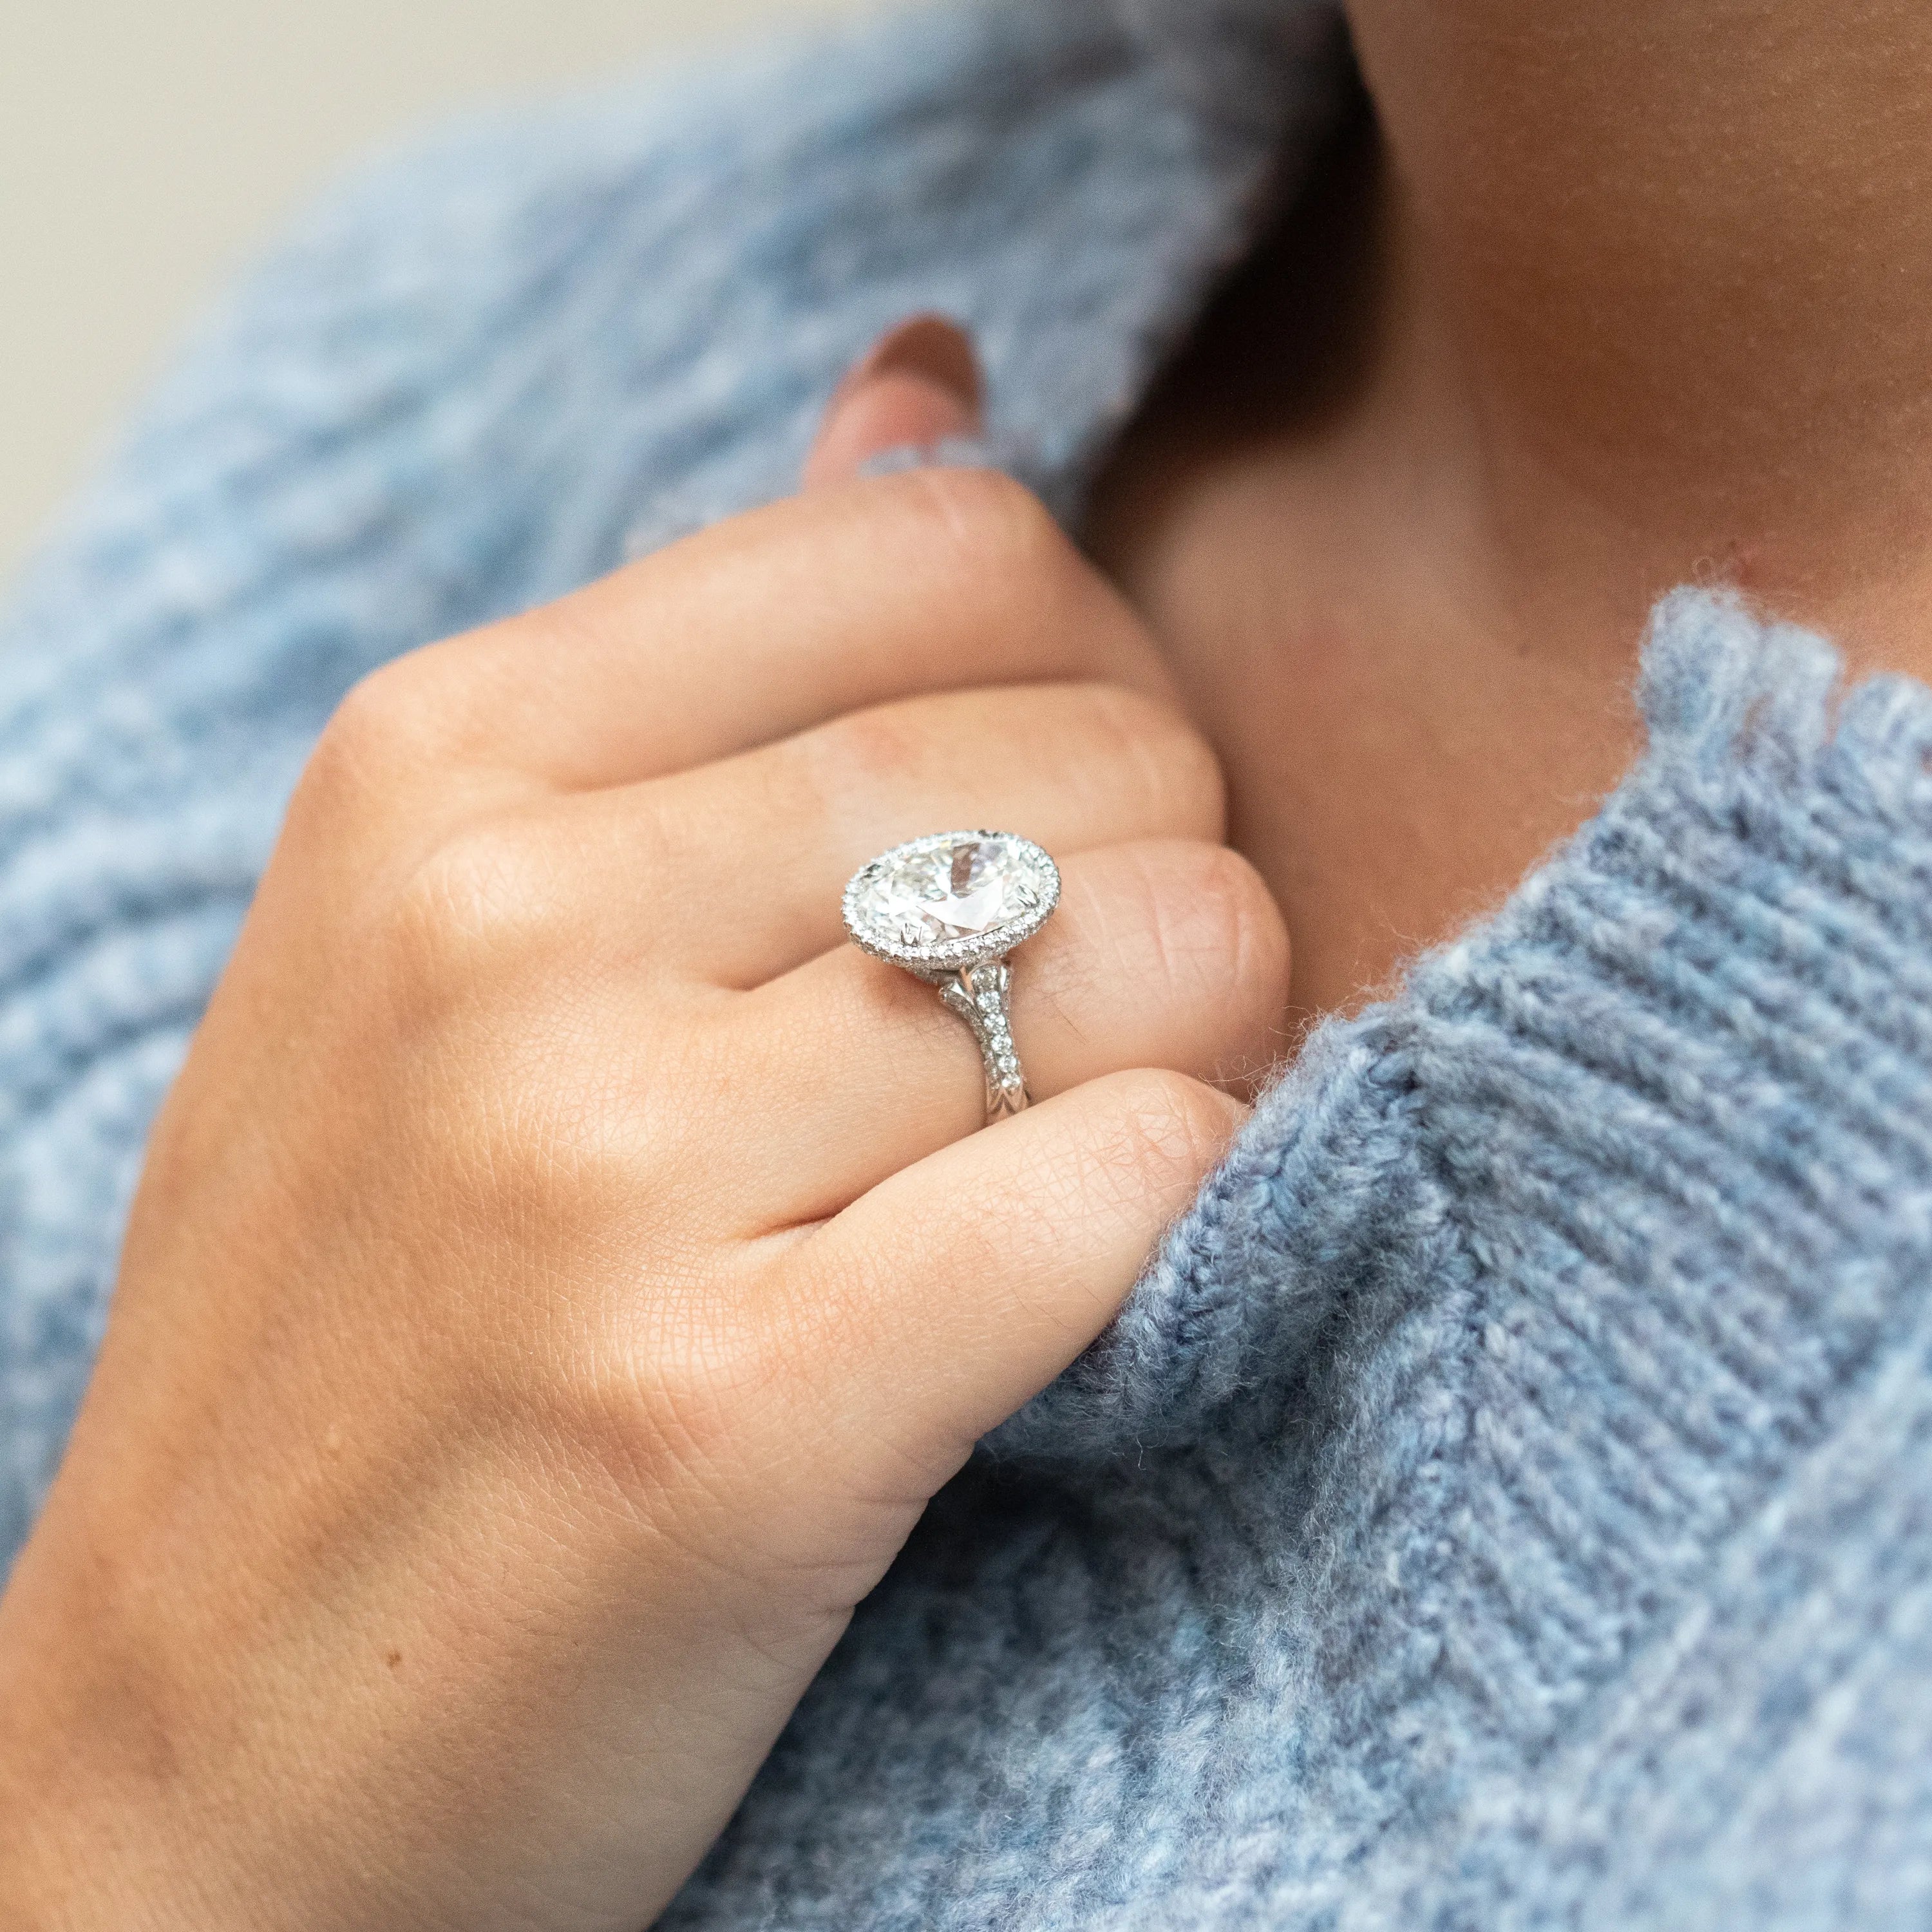 Tips for Keeping Your Engagement Ring Sparkling